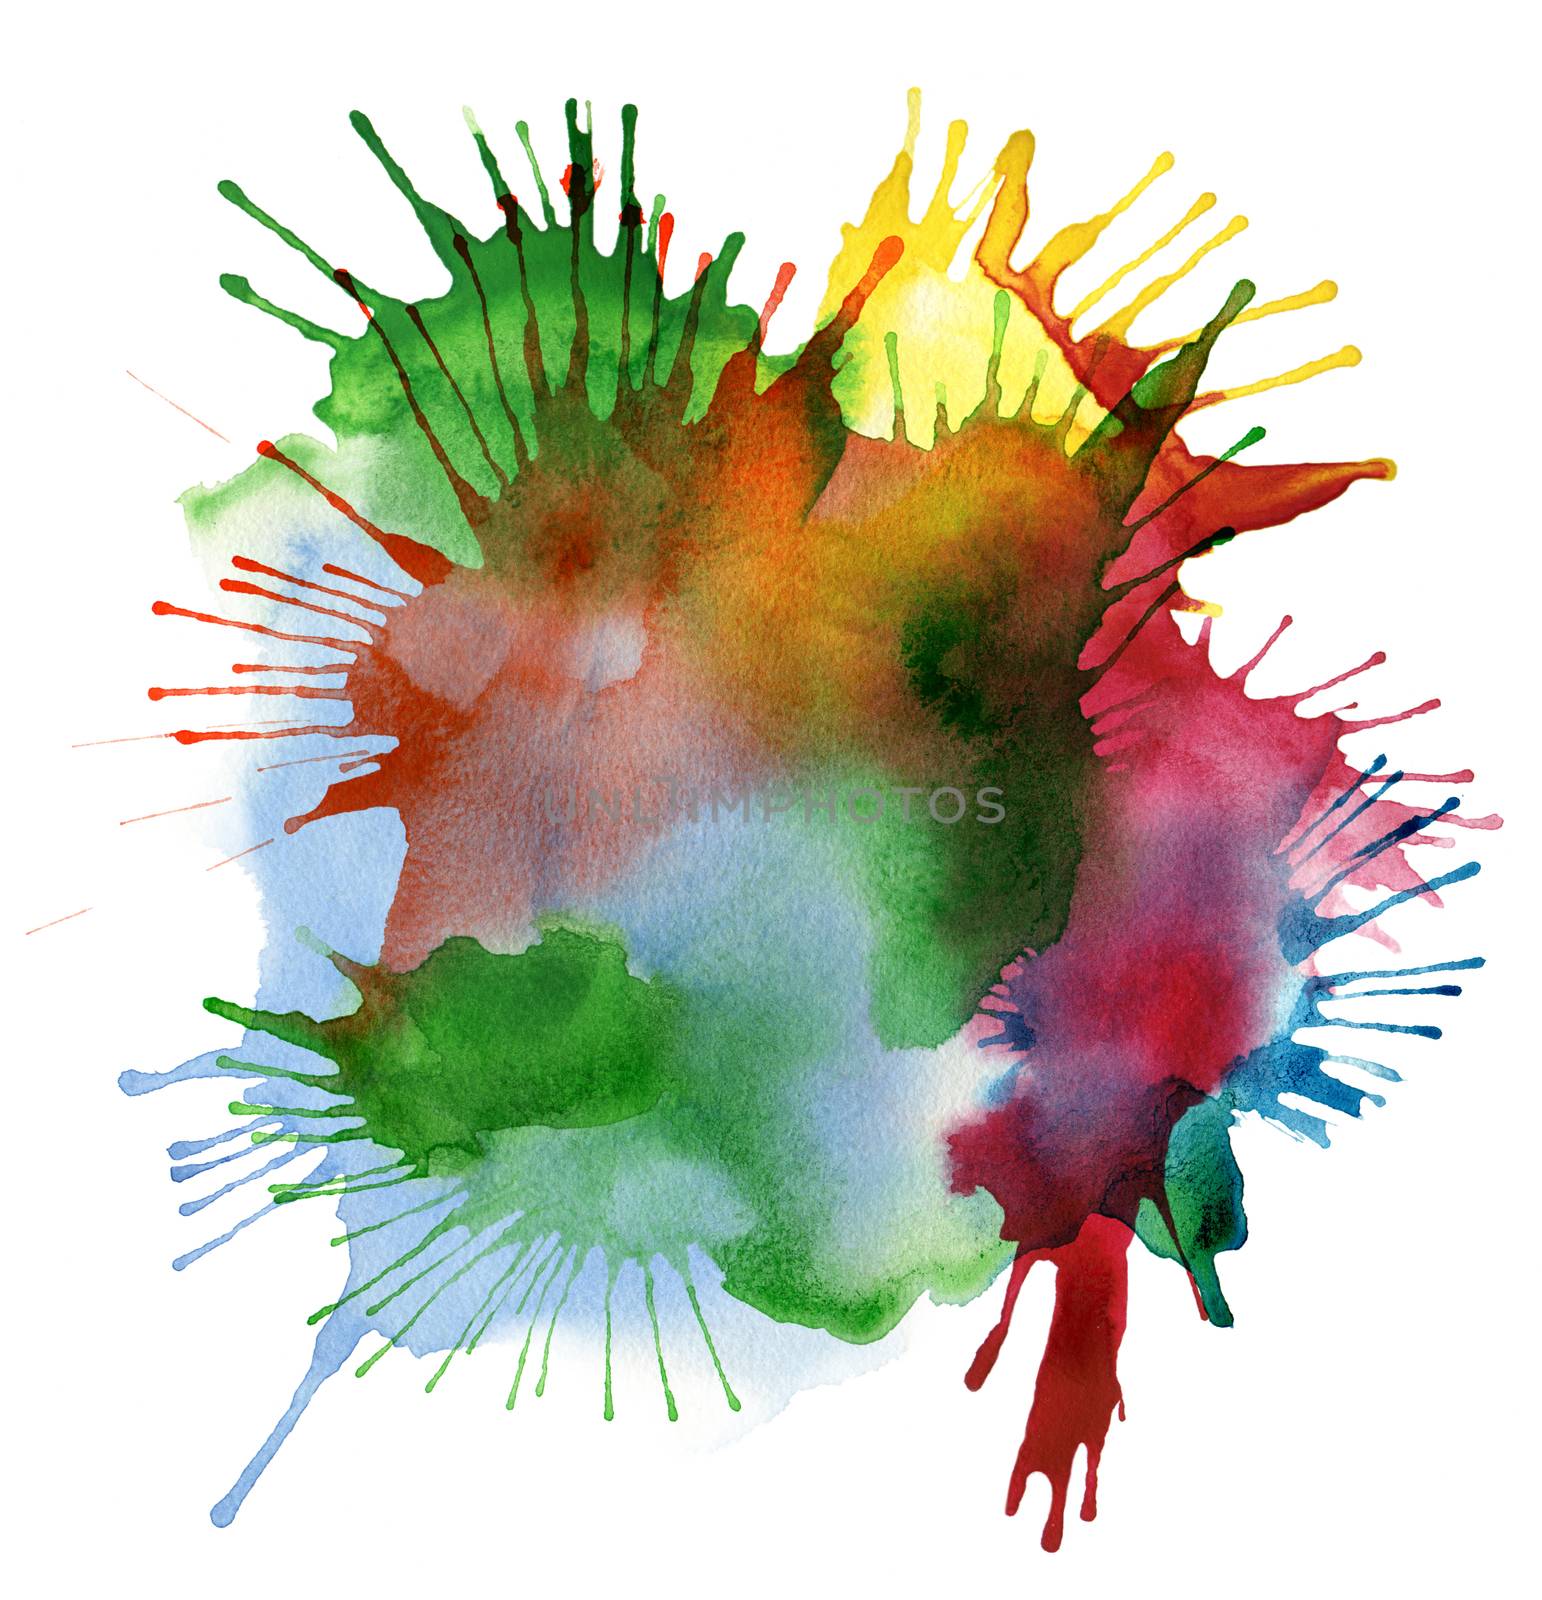 abstract color watercolor blot background